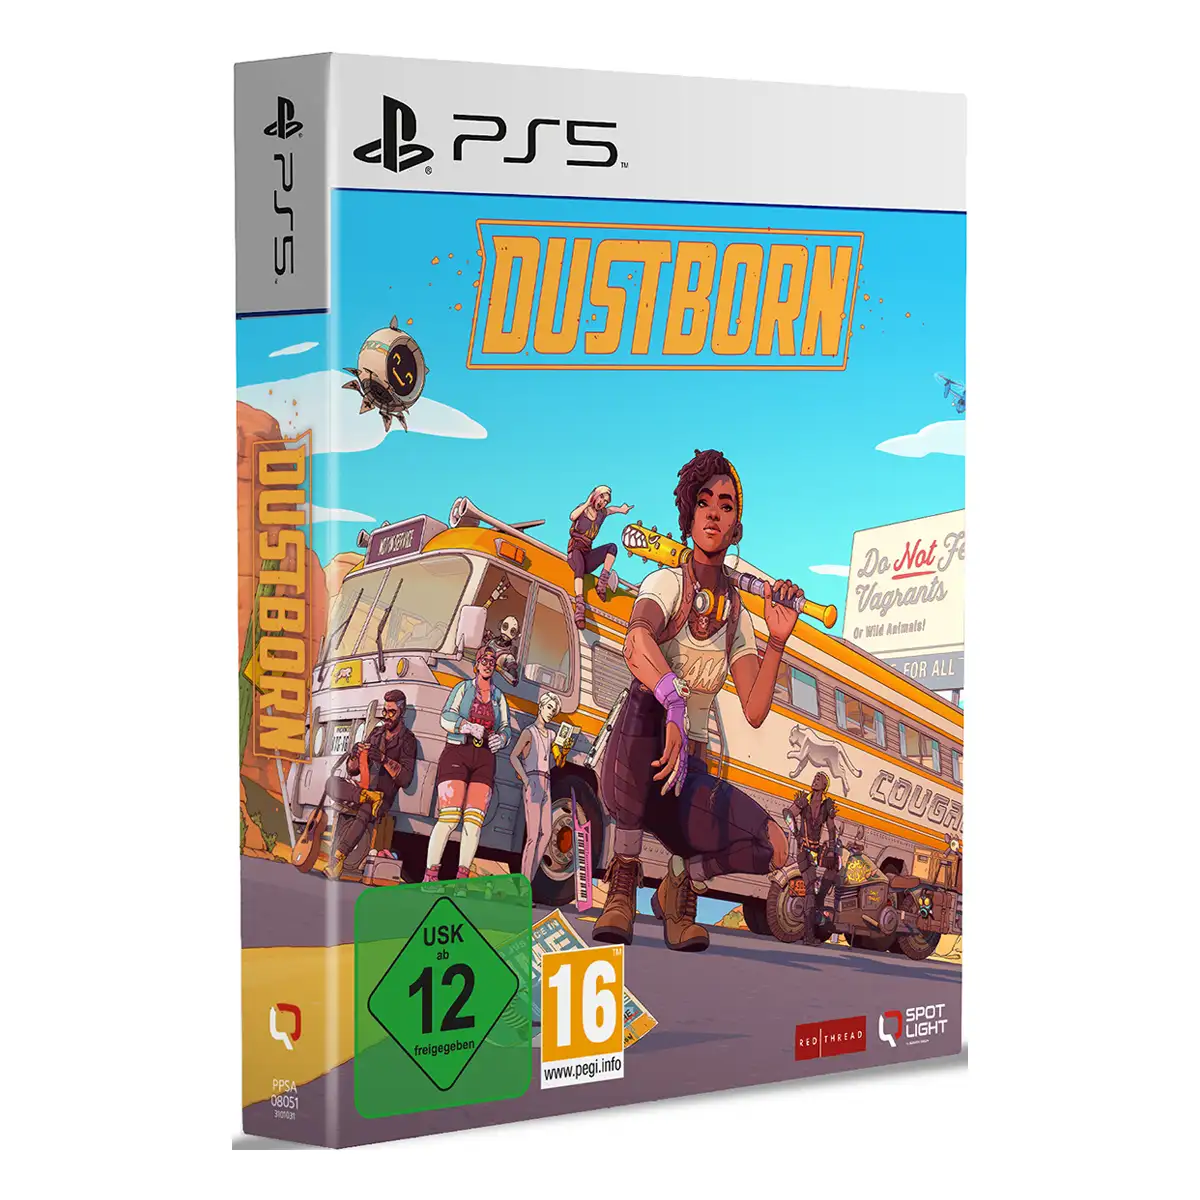 Dustborn Deluxe Edition (PS5) Image 2